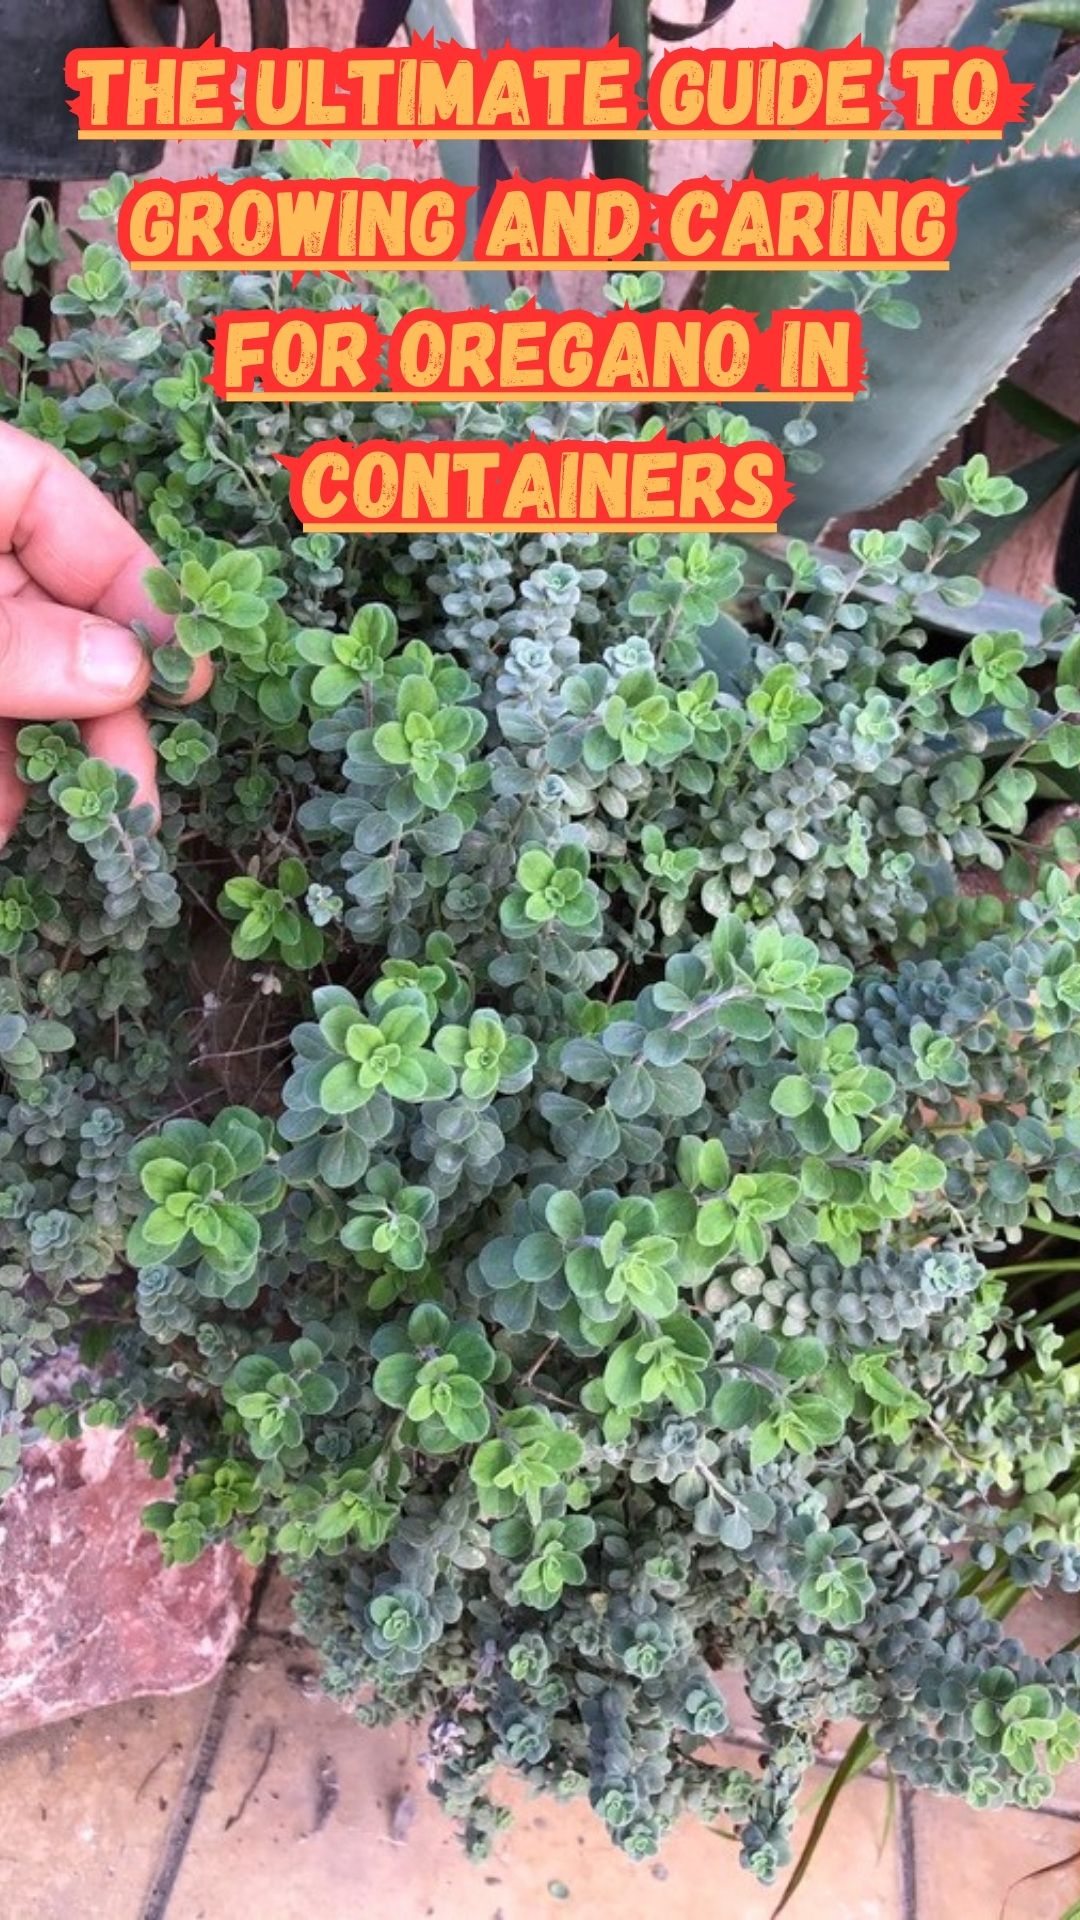 Cultivating oregano in containers not only provides a practical solution for limited space but also opens a gateway to a world of flavors and aromatic delights. The joy of nurturing a thriving herb garden, witnessing the growth of fresh, vibrant leaves, and reaping the rewards in your culinary and wellness pursuits is truly fulfilling.